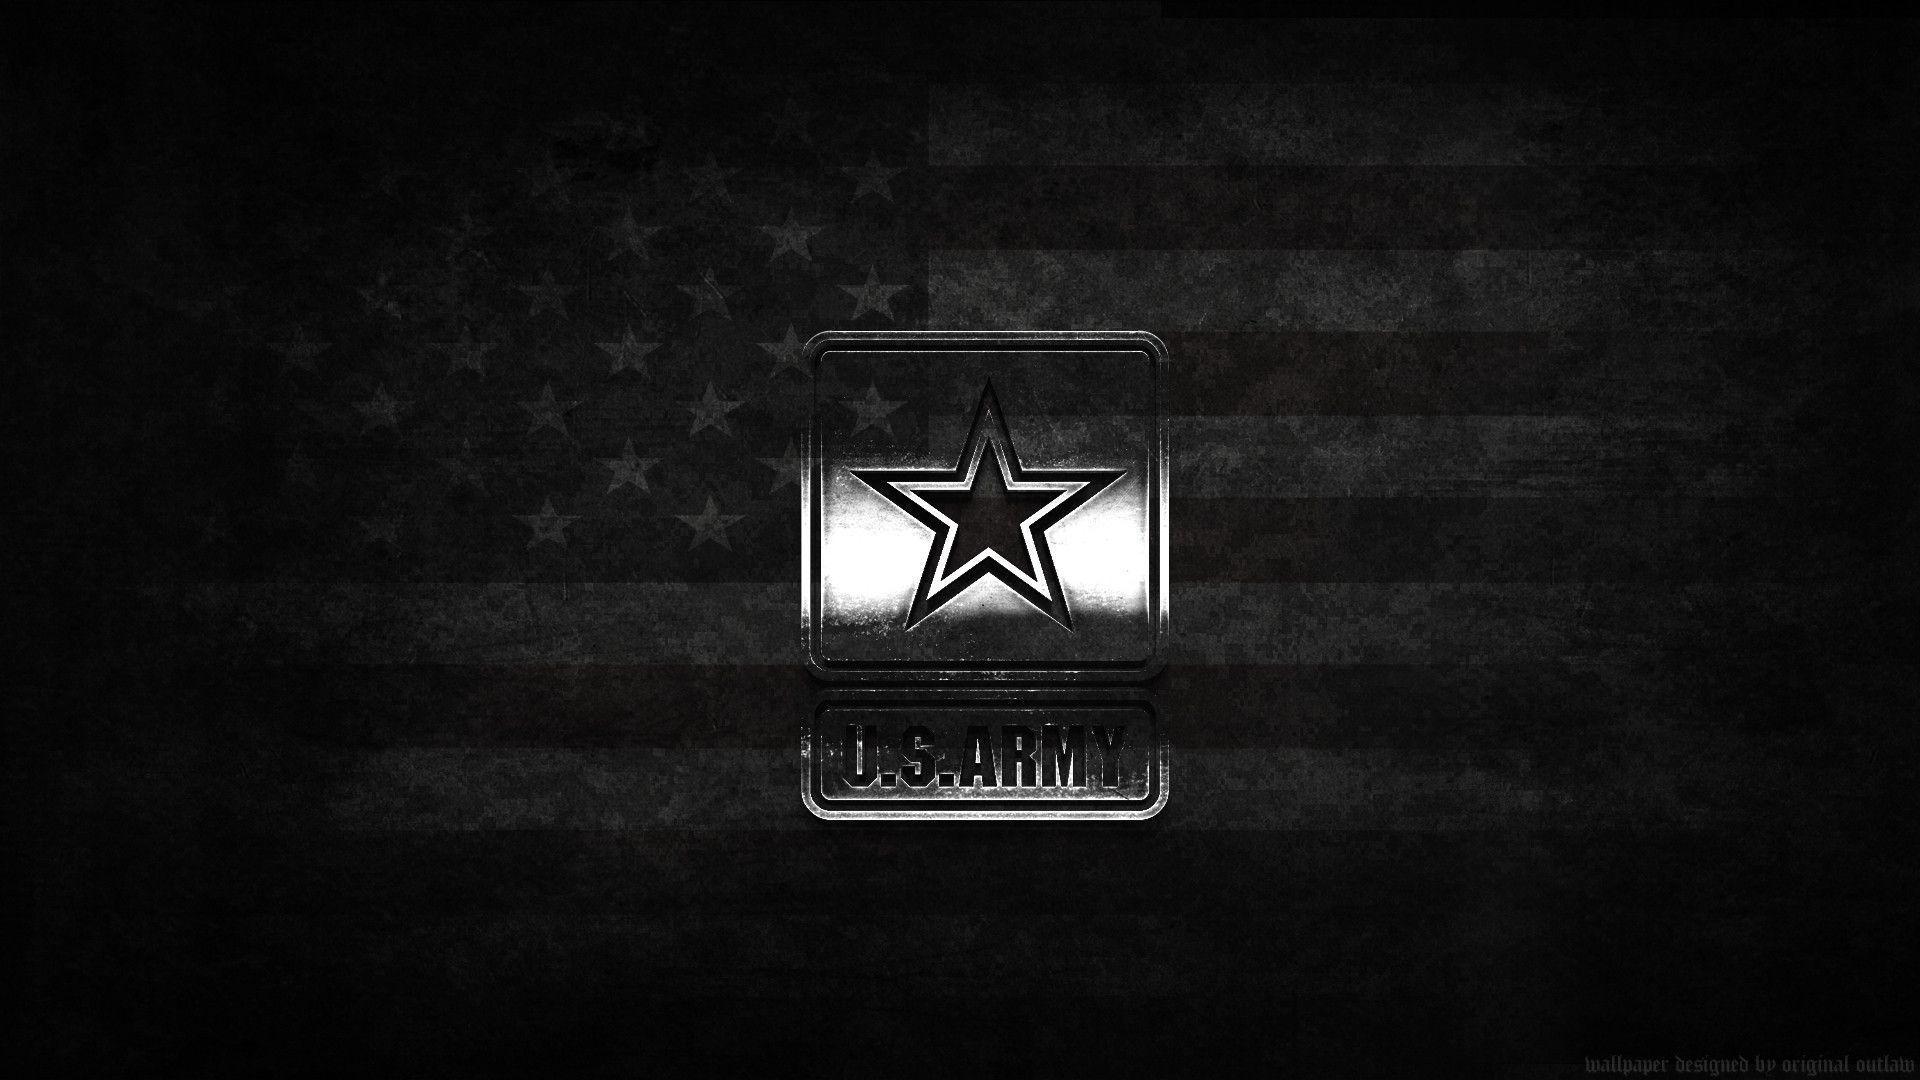 US Army Wallpaper Background. Army wallpaper